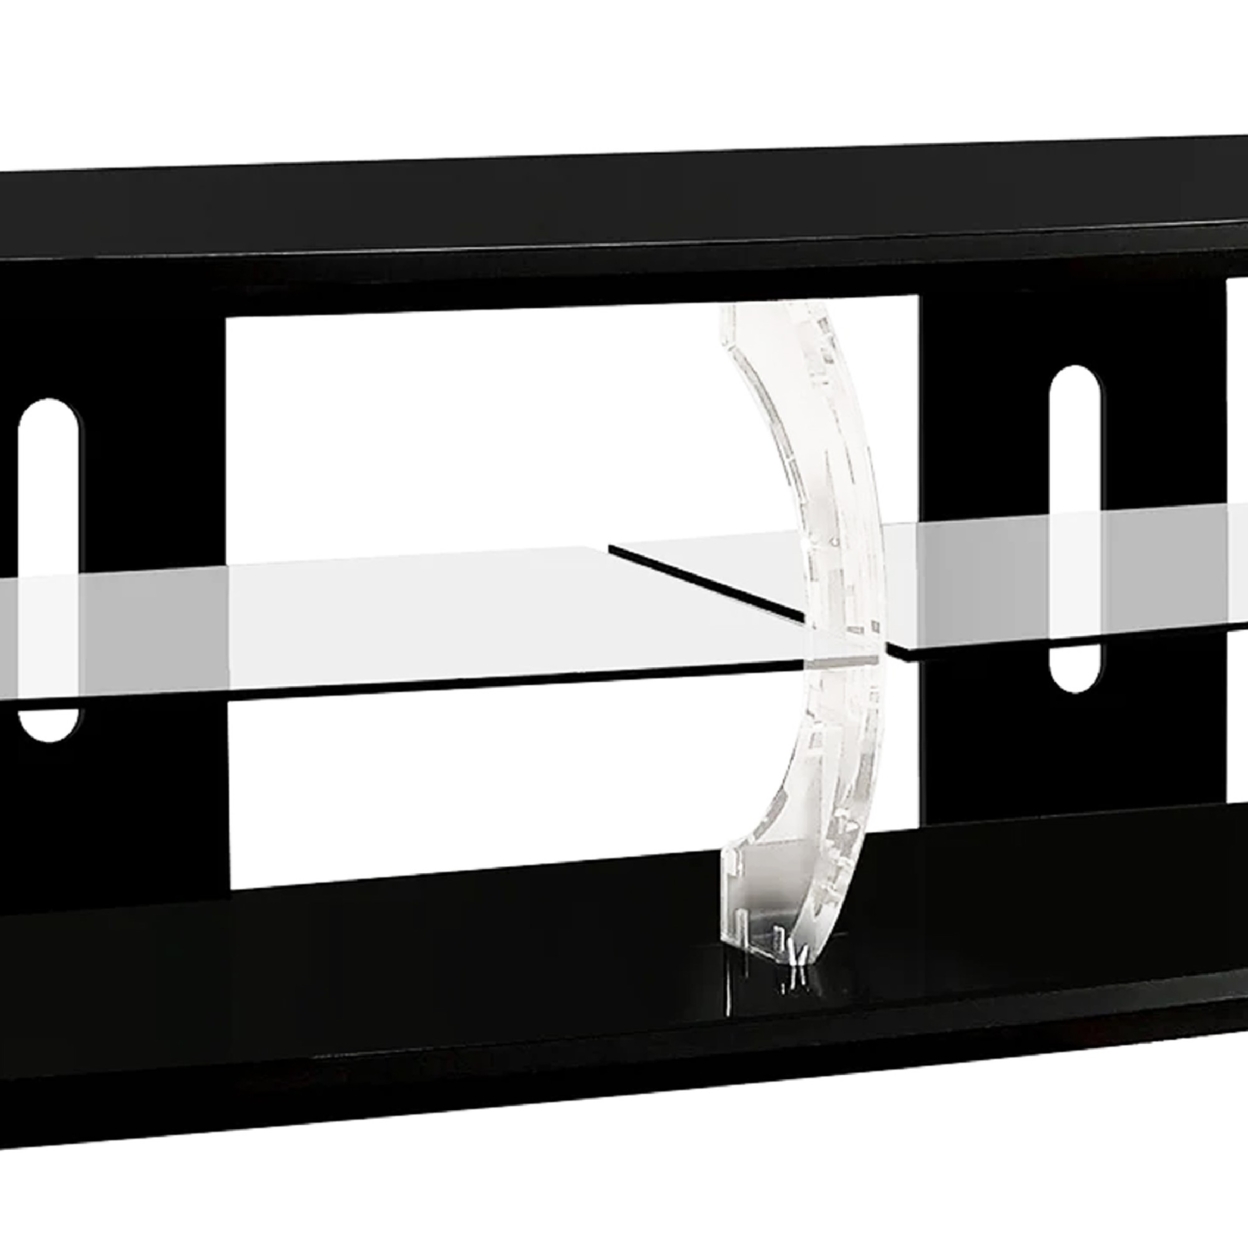 72 Wooden TV Stand With Spacious Glass Shelf, Black And Clear- Saltoro Sherpi